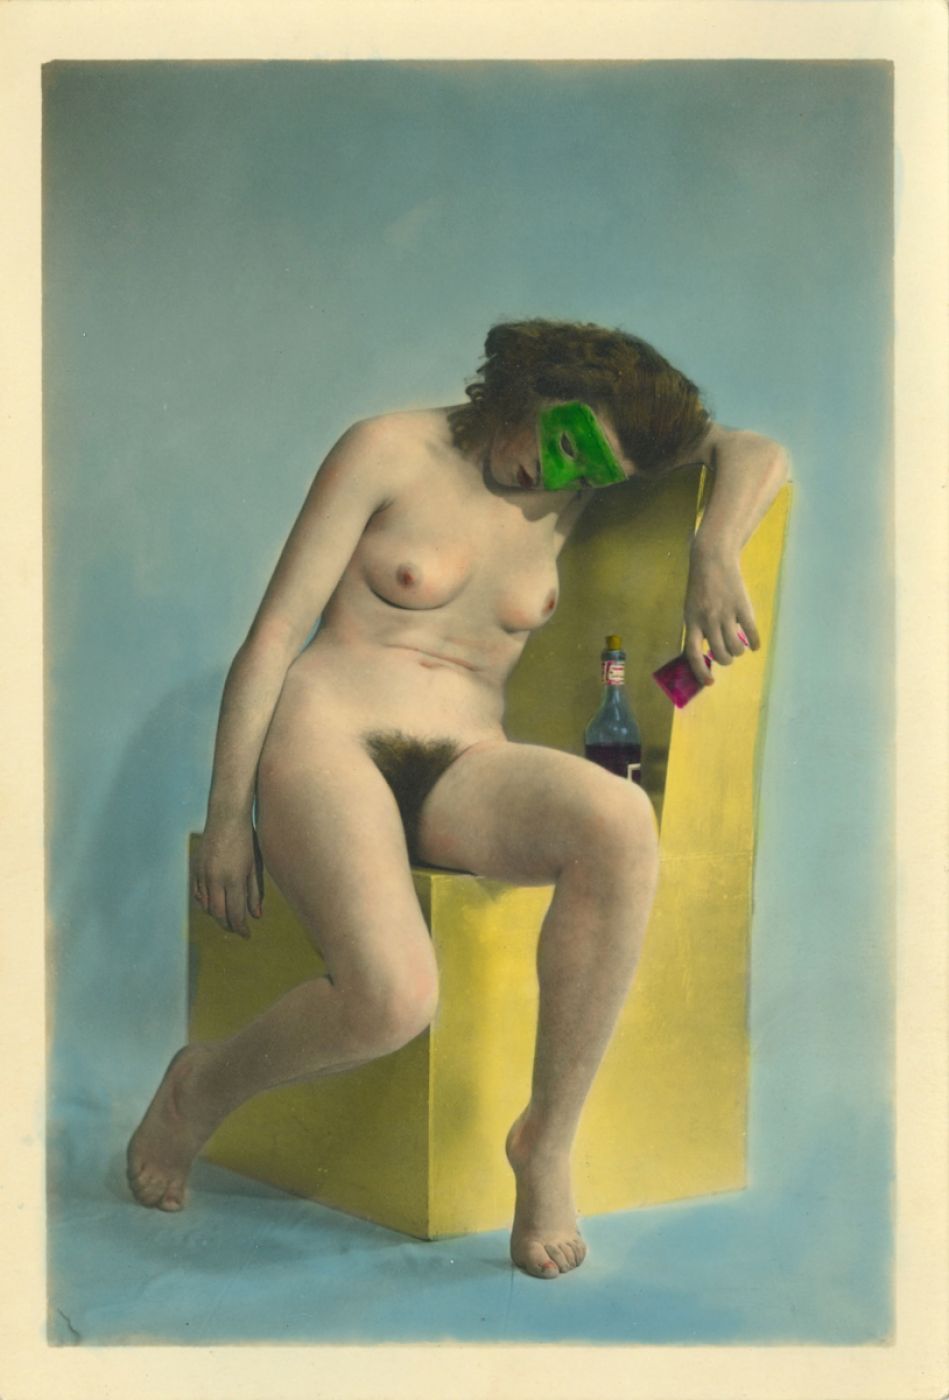 Anonymous, “Untitled”, 1930 ca.